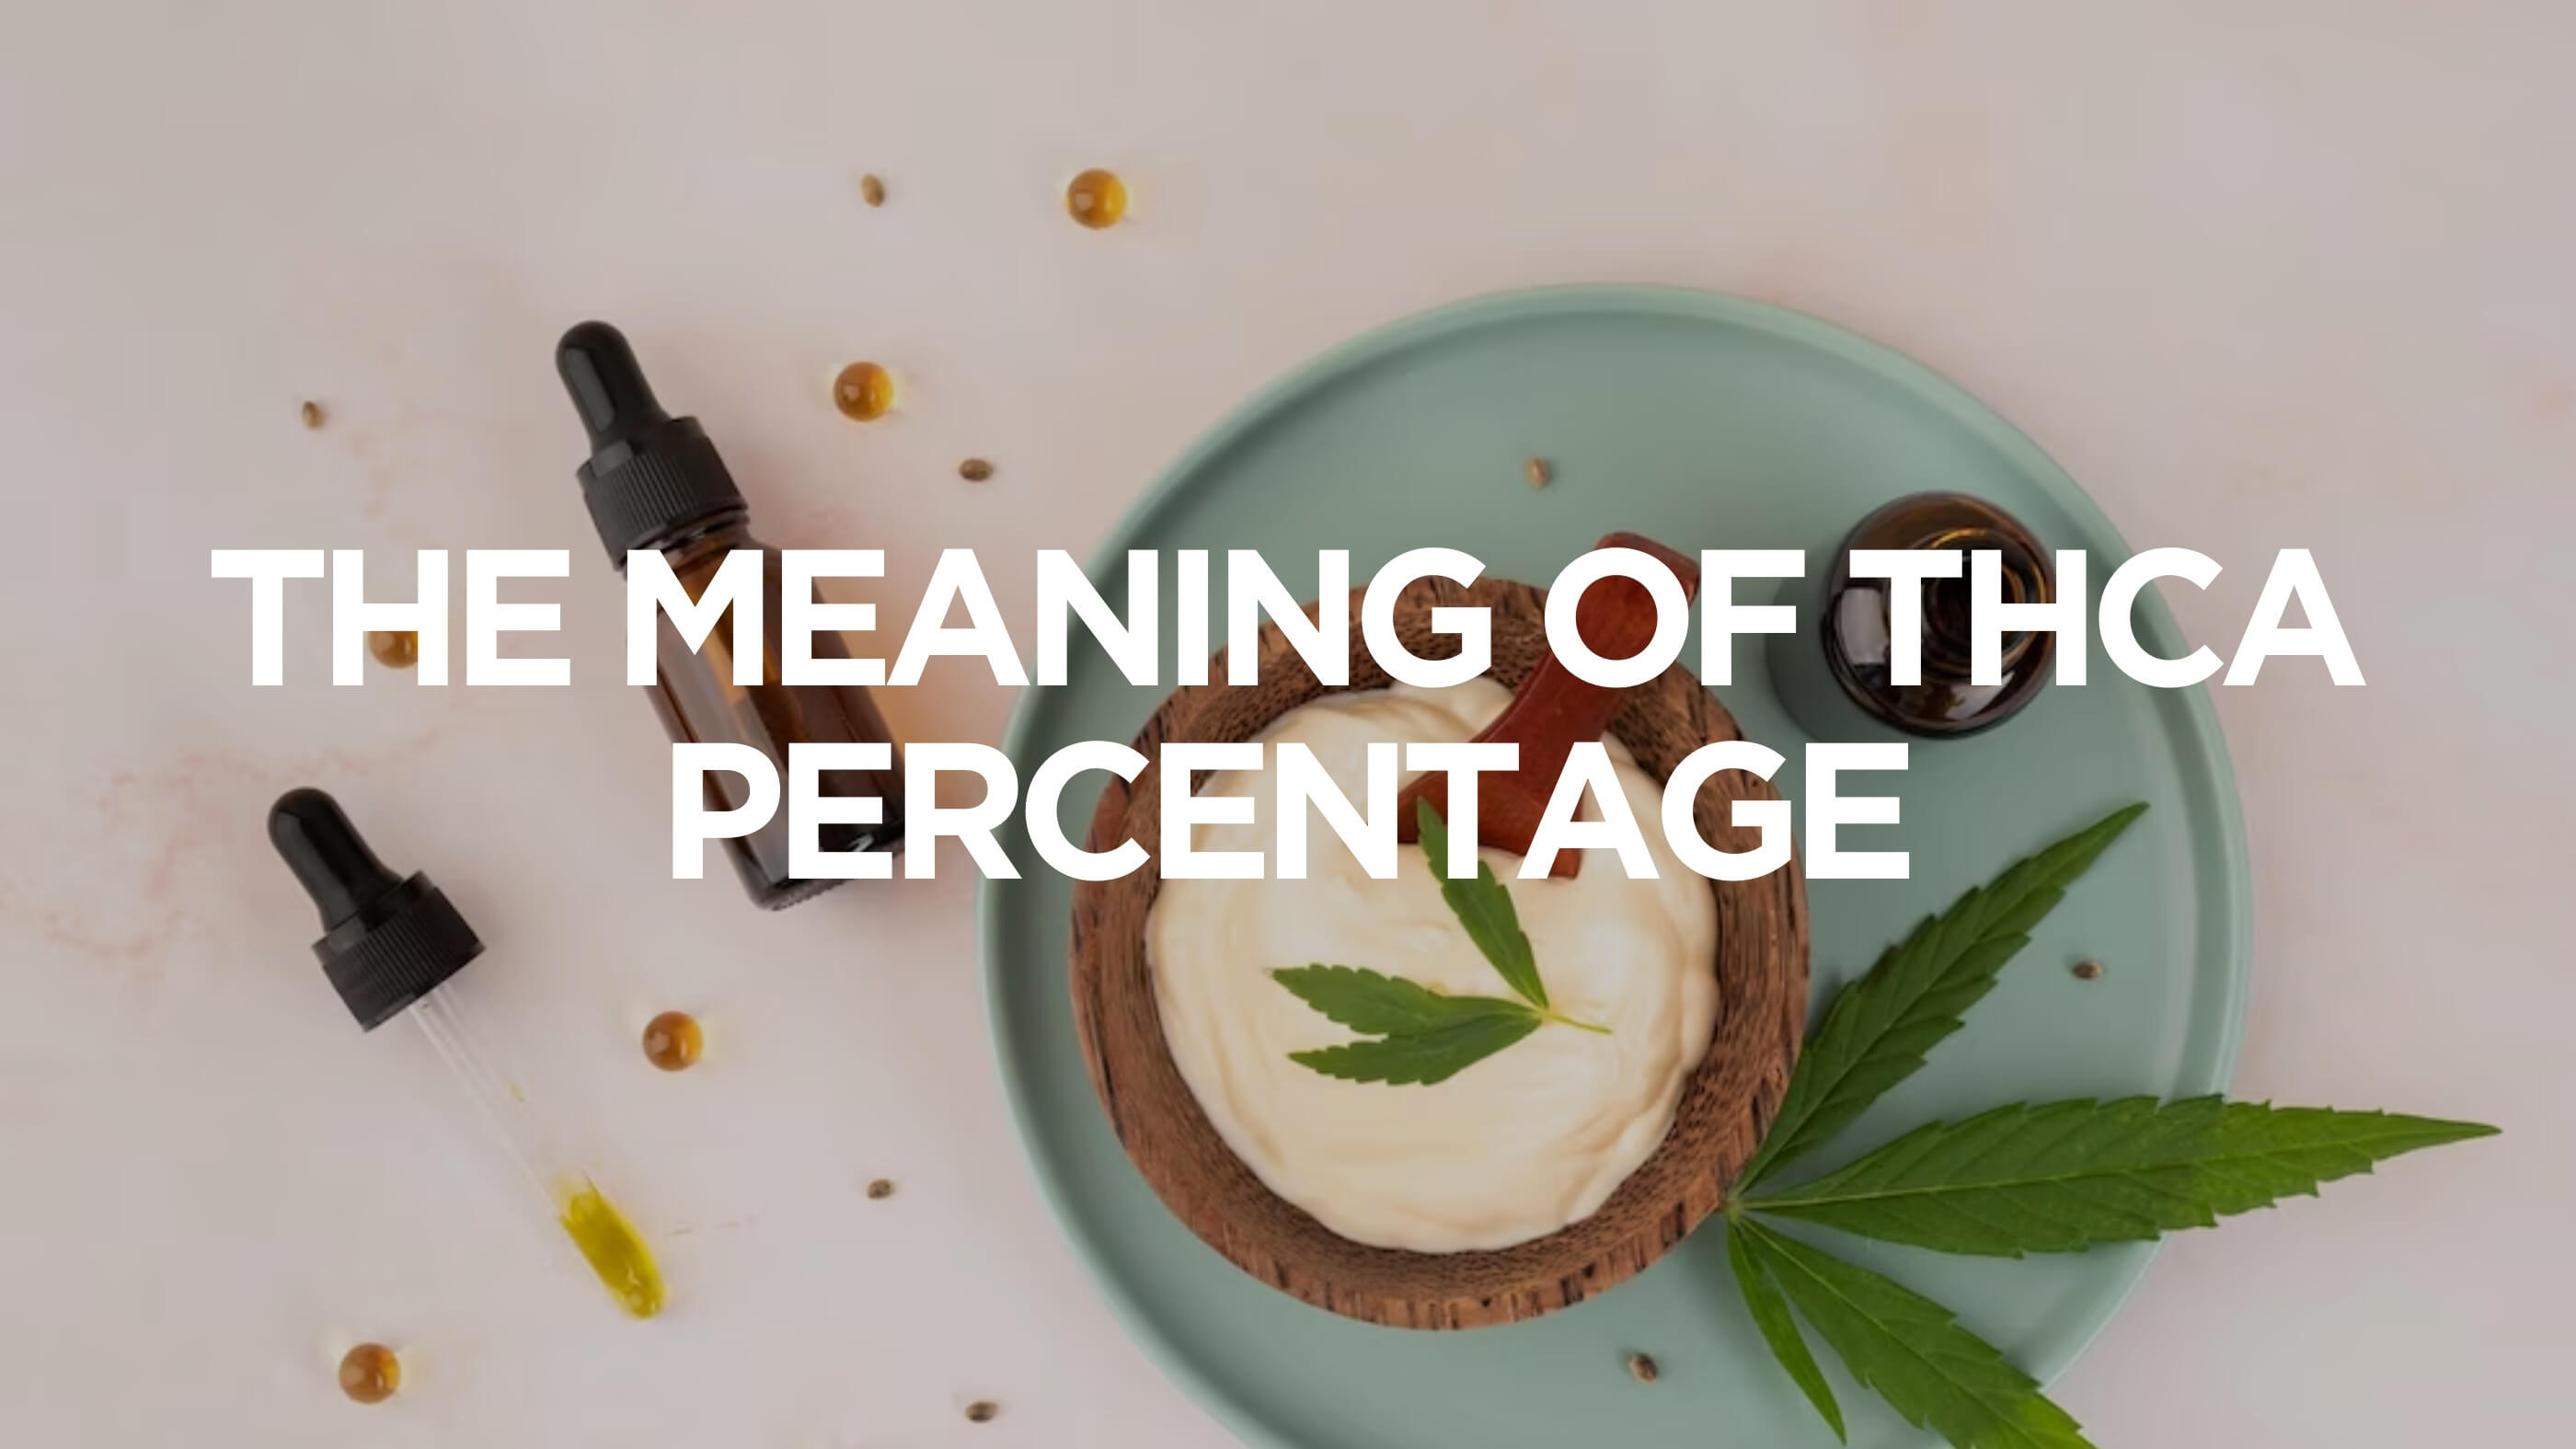 Learn About the Meaning of THCA Percentage | Apotheca.org Cannaphile Blog